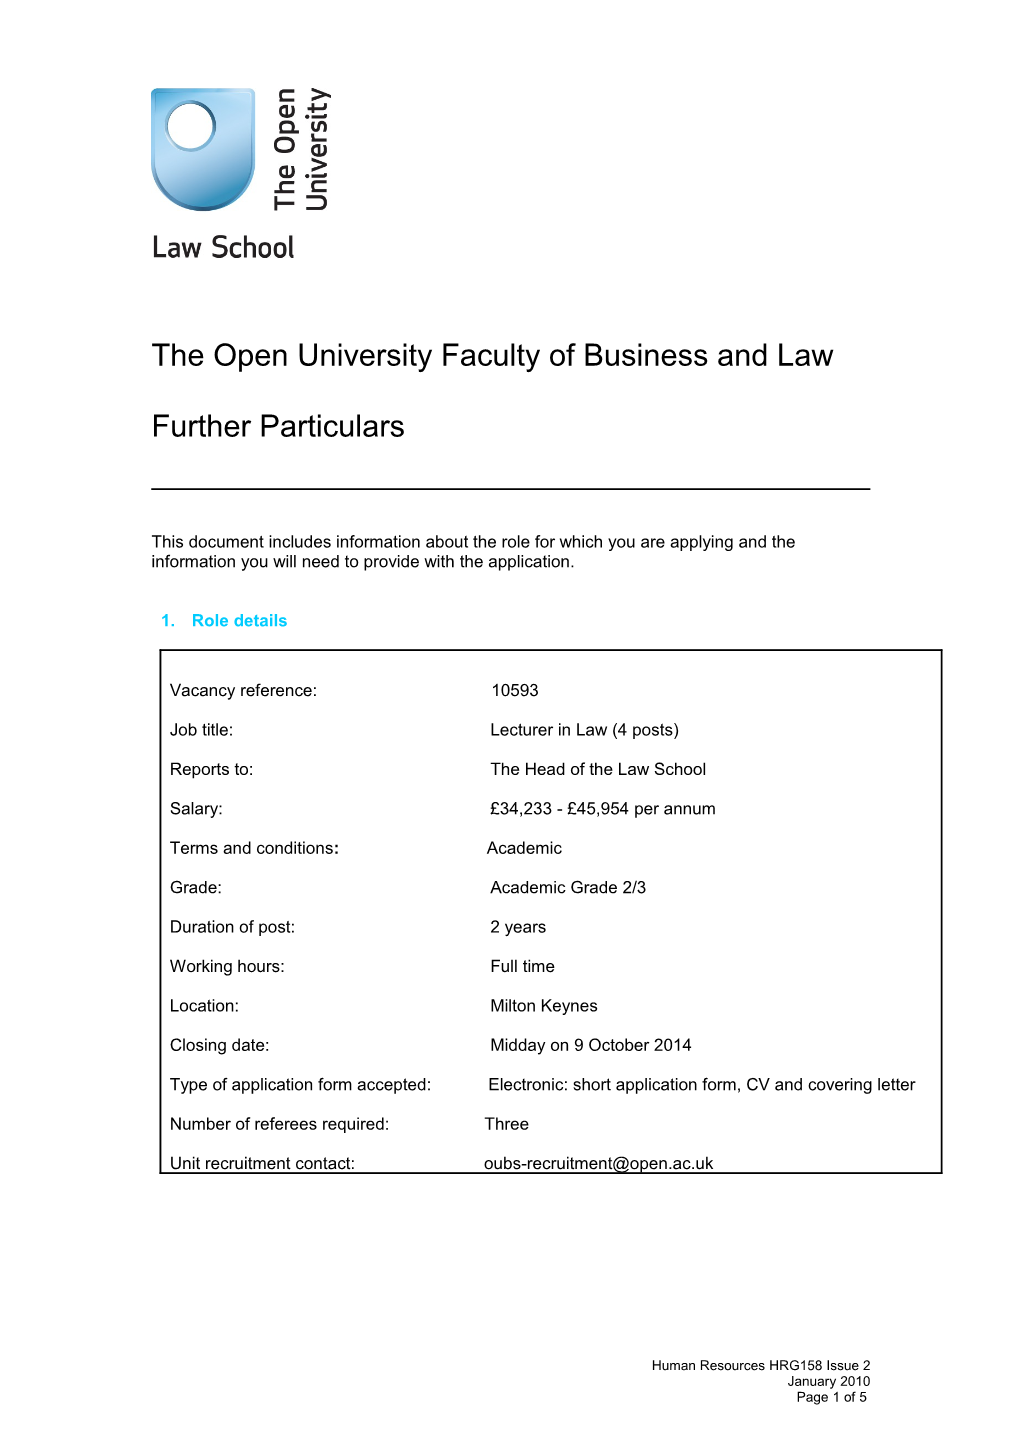 The Open University Faculty of Business and Law